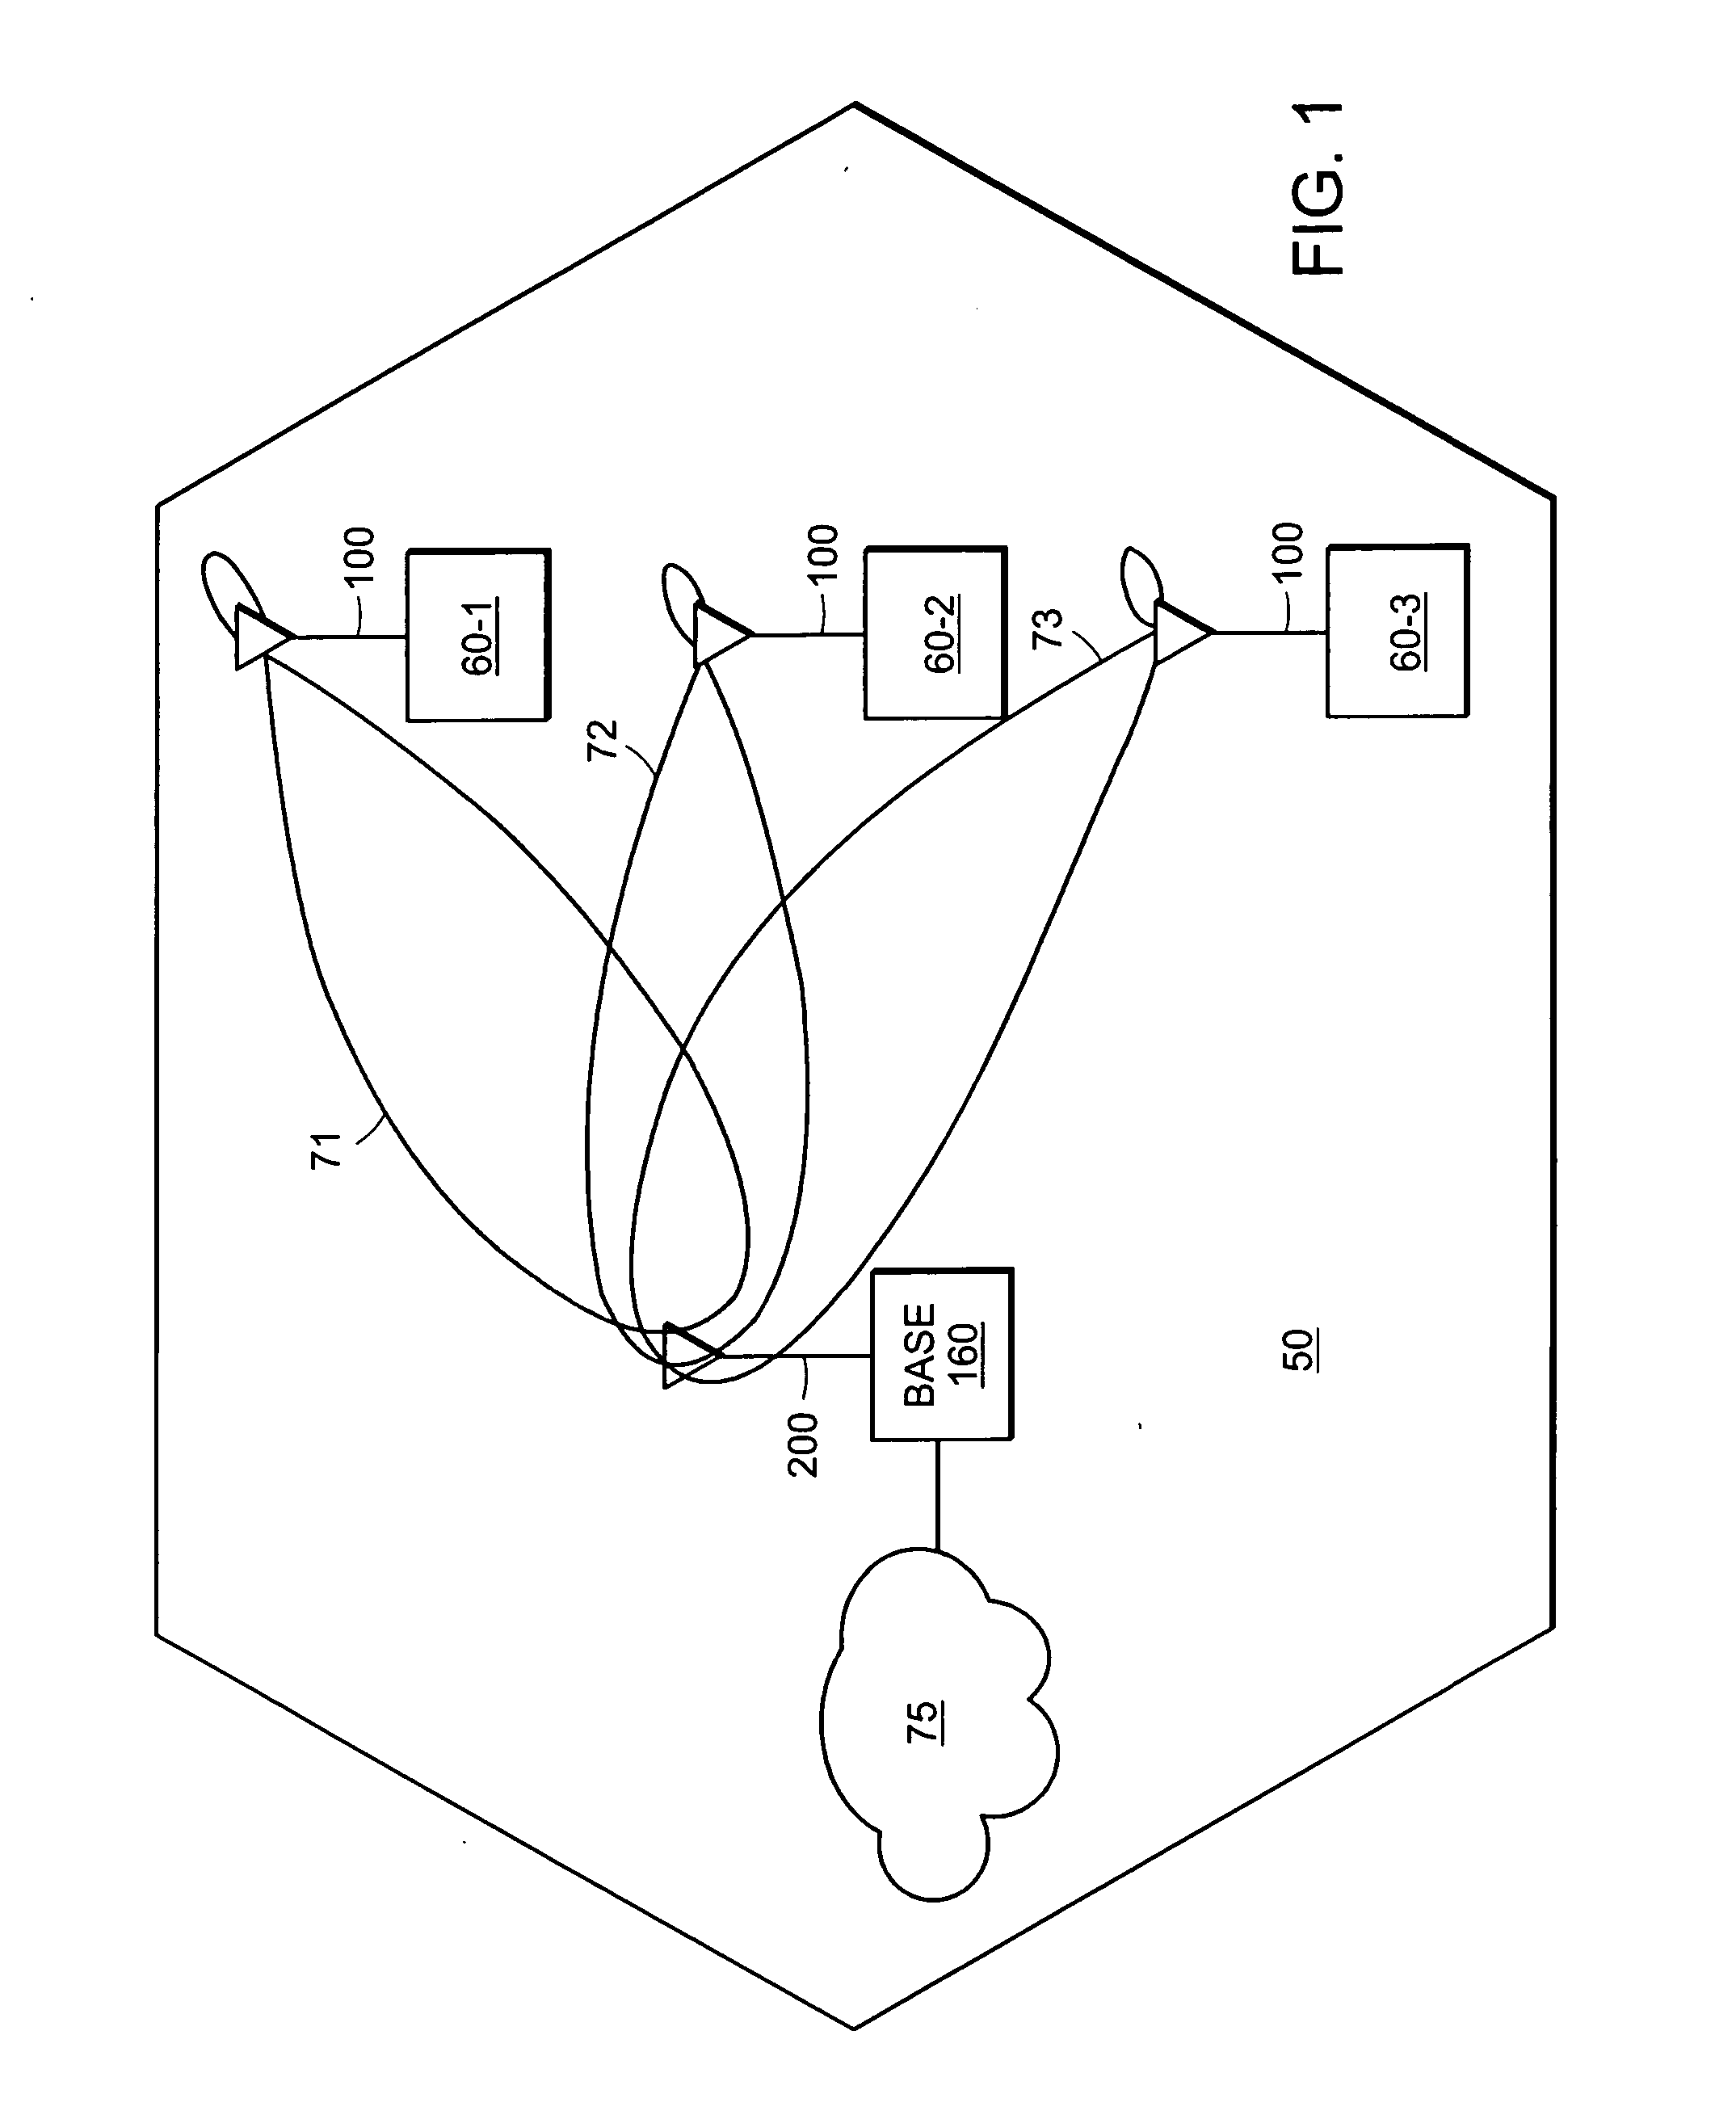 Adaptive antenna for use in wireless communication systems